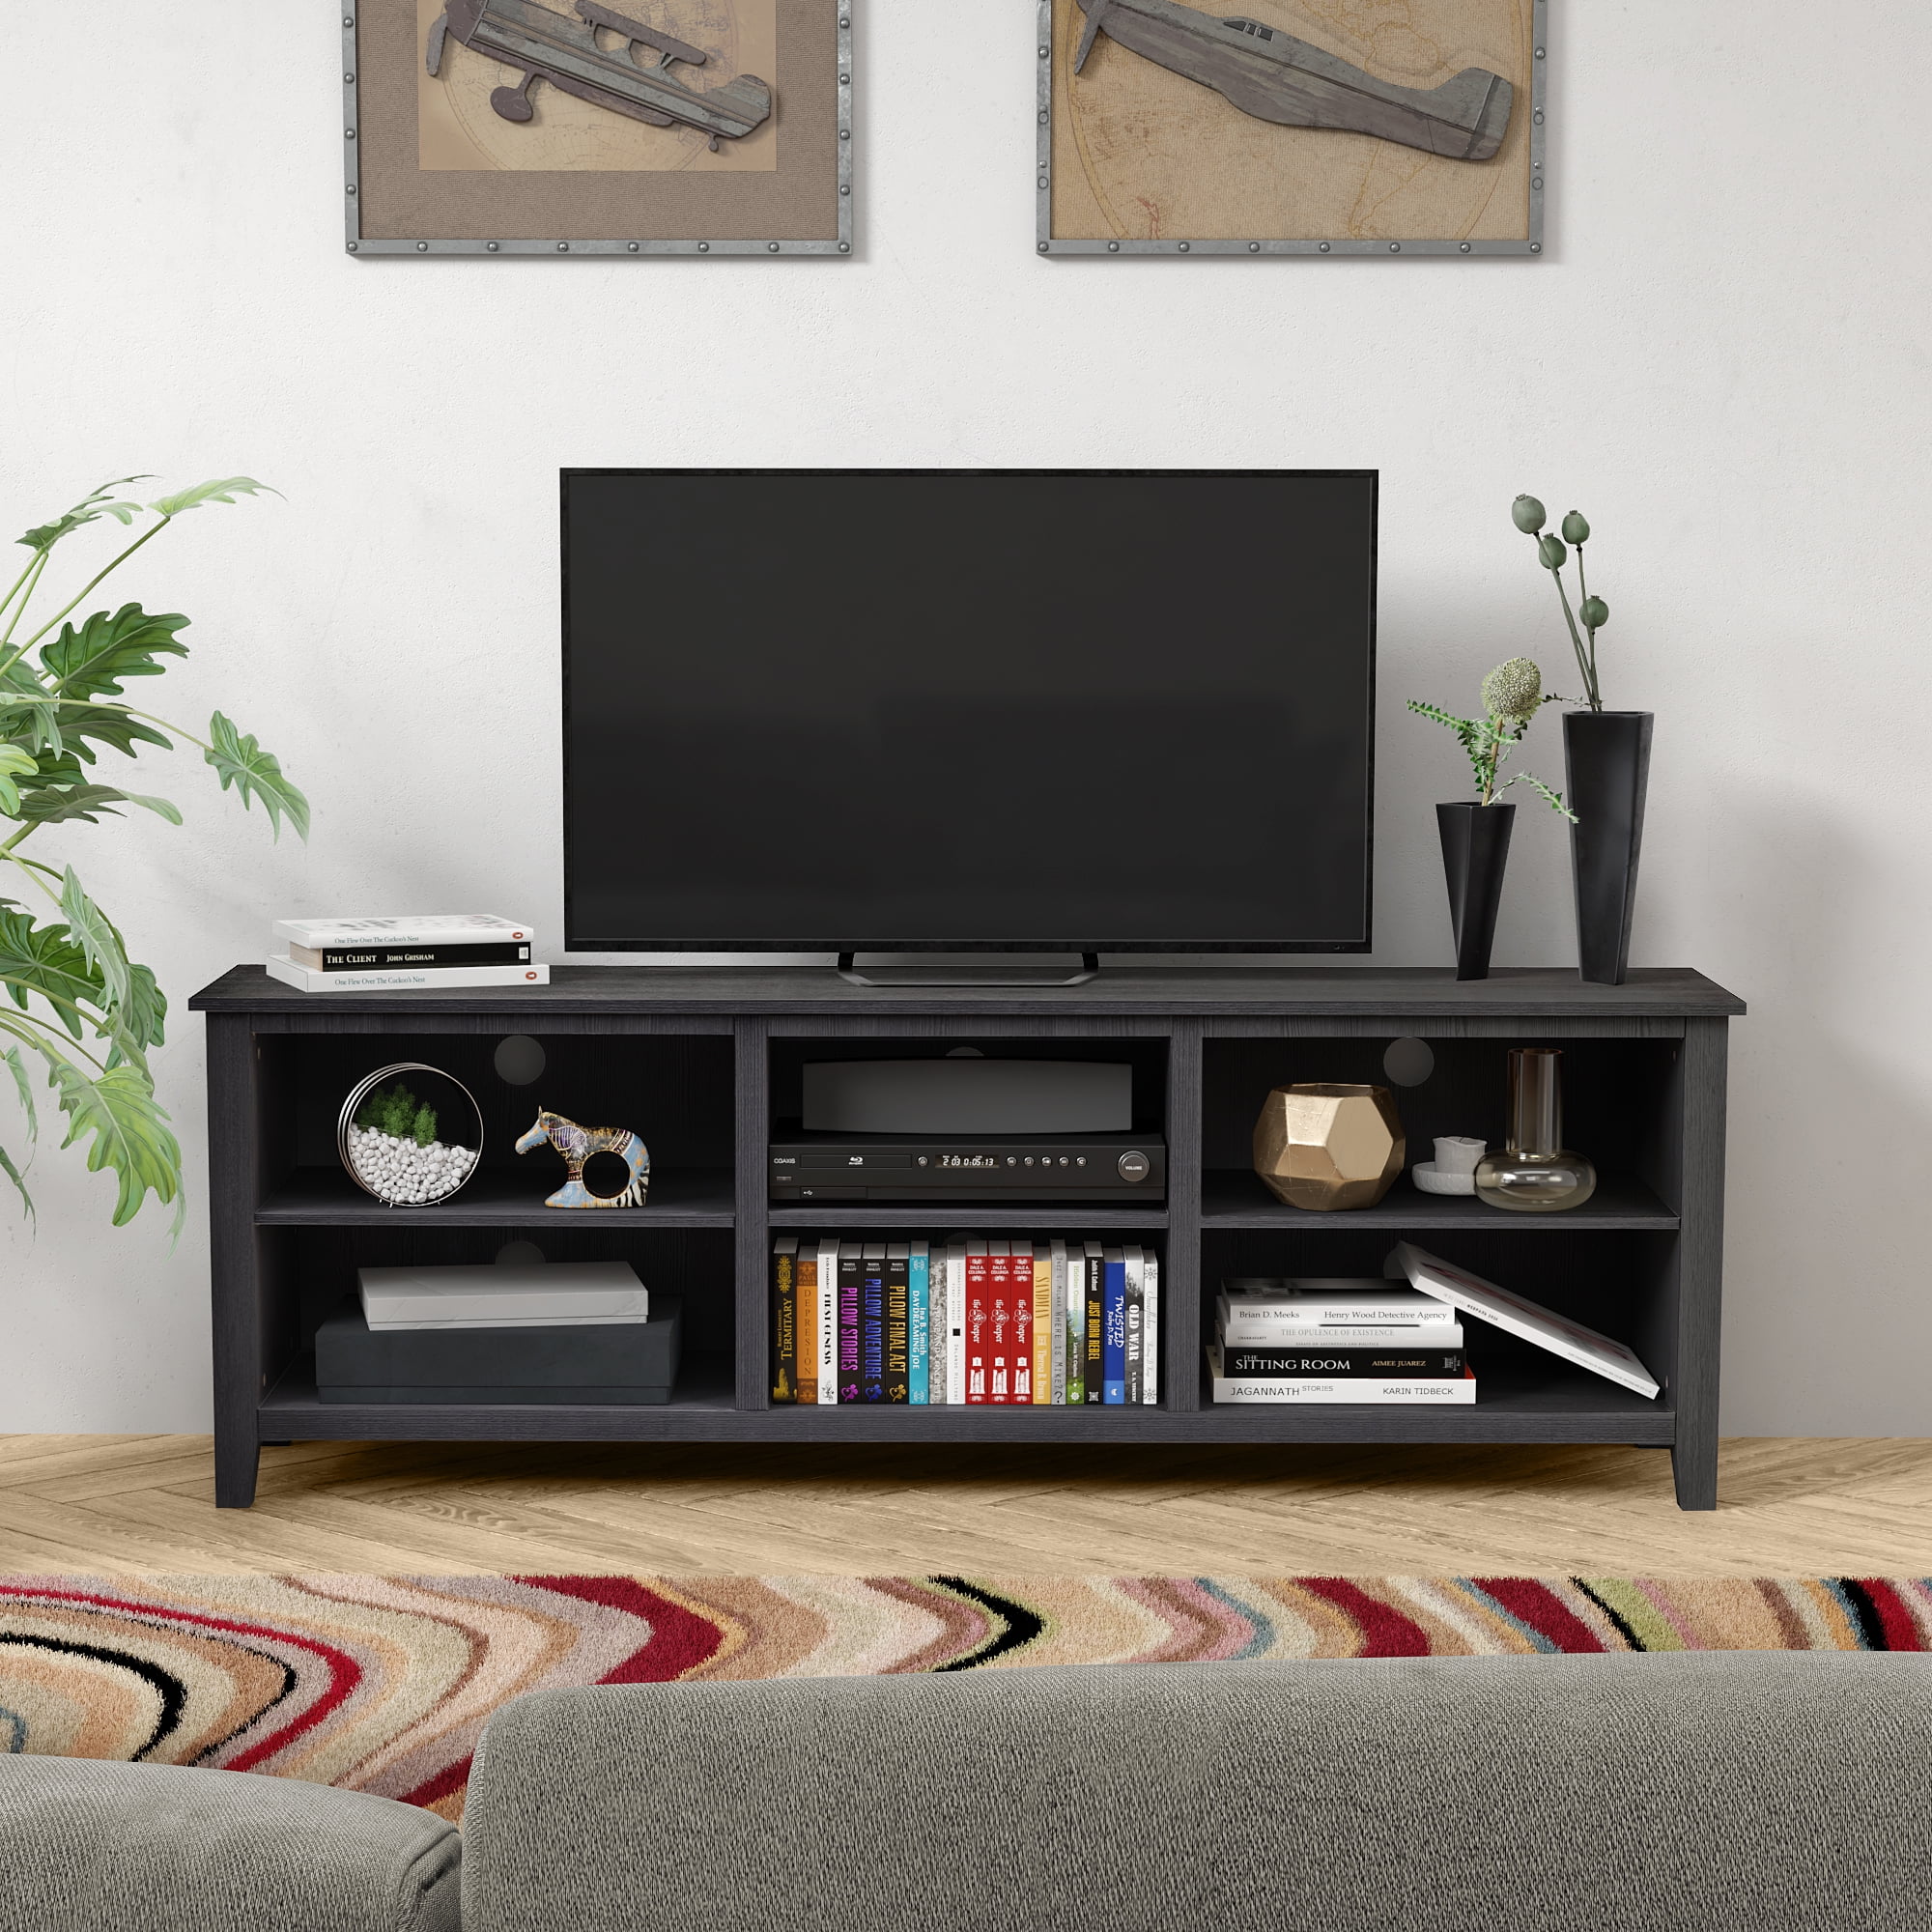 image 0 of Fireplace TV Stands for TVs up to 85'', Wood TV Console with Electric Fireplace Insert, Rustic Farmhouse TV Stand Media Console Sofa Table with 6 Adjustable Shelves for Living Room, Black, SS300